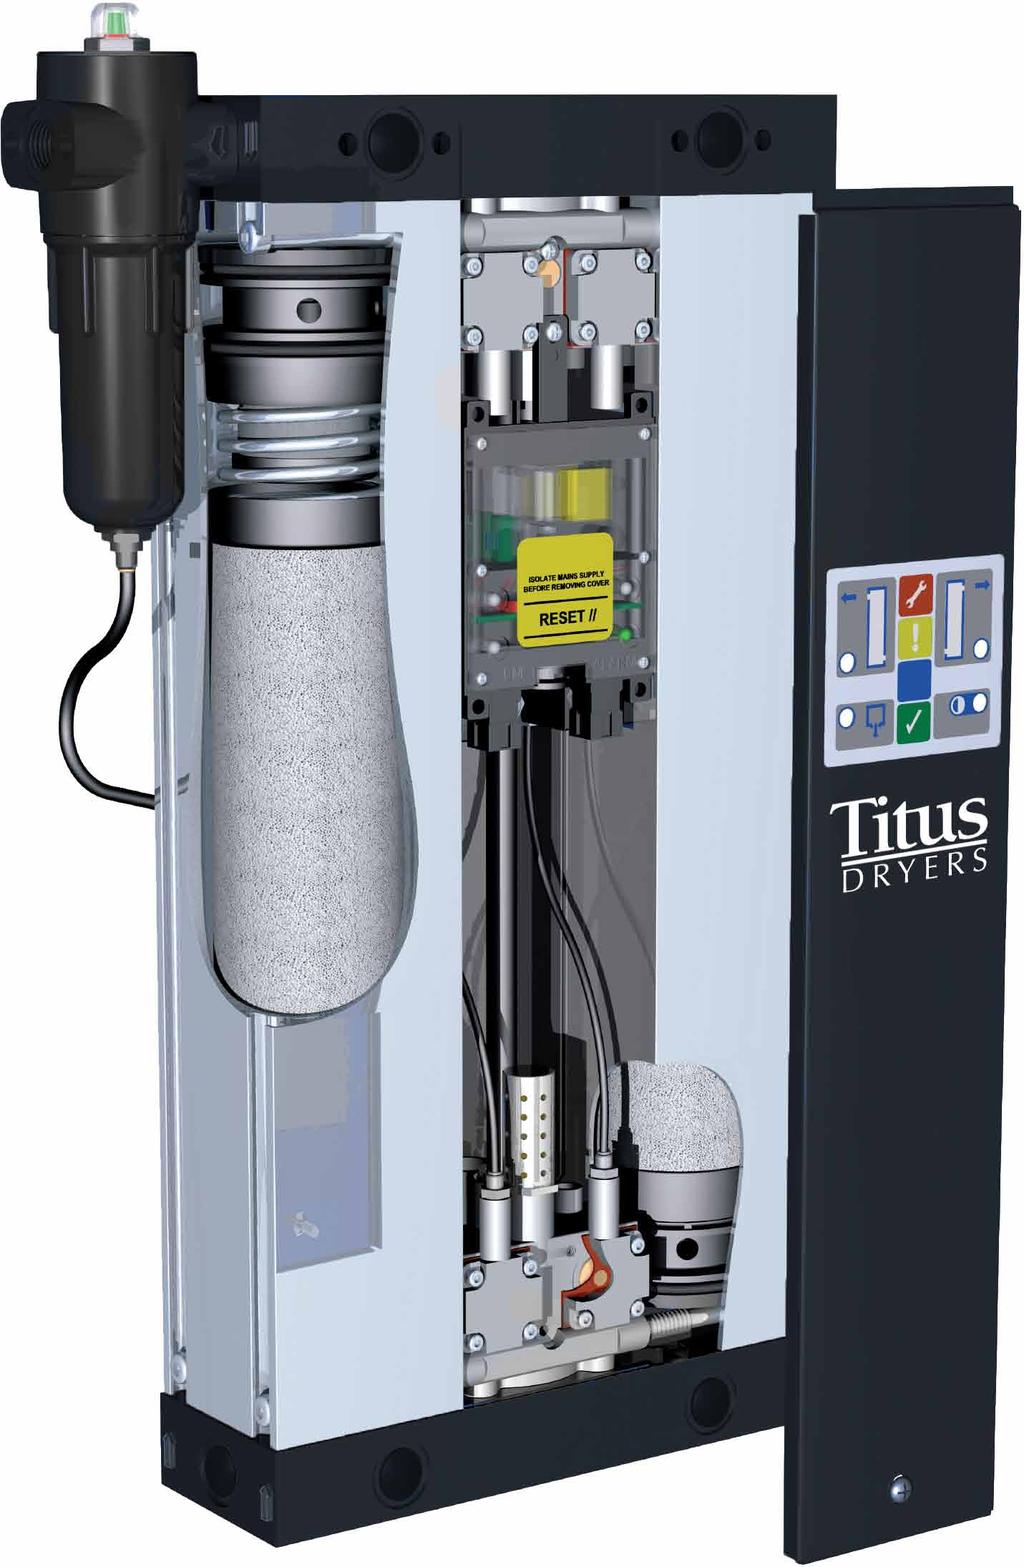 Titus Air Systems Dryer Features Suitable for worldwide installation Multi-voltage capabilities Extruded aluminium towers fully painted for corrosion protection Removable front panel allows